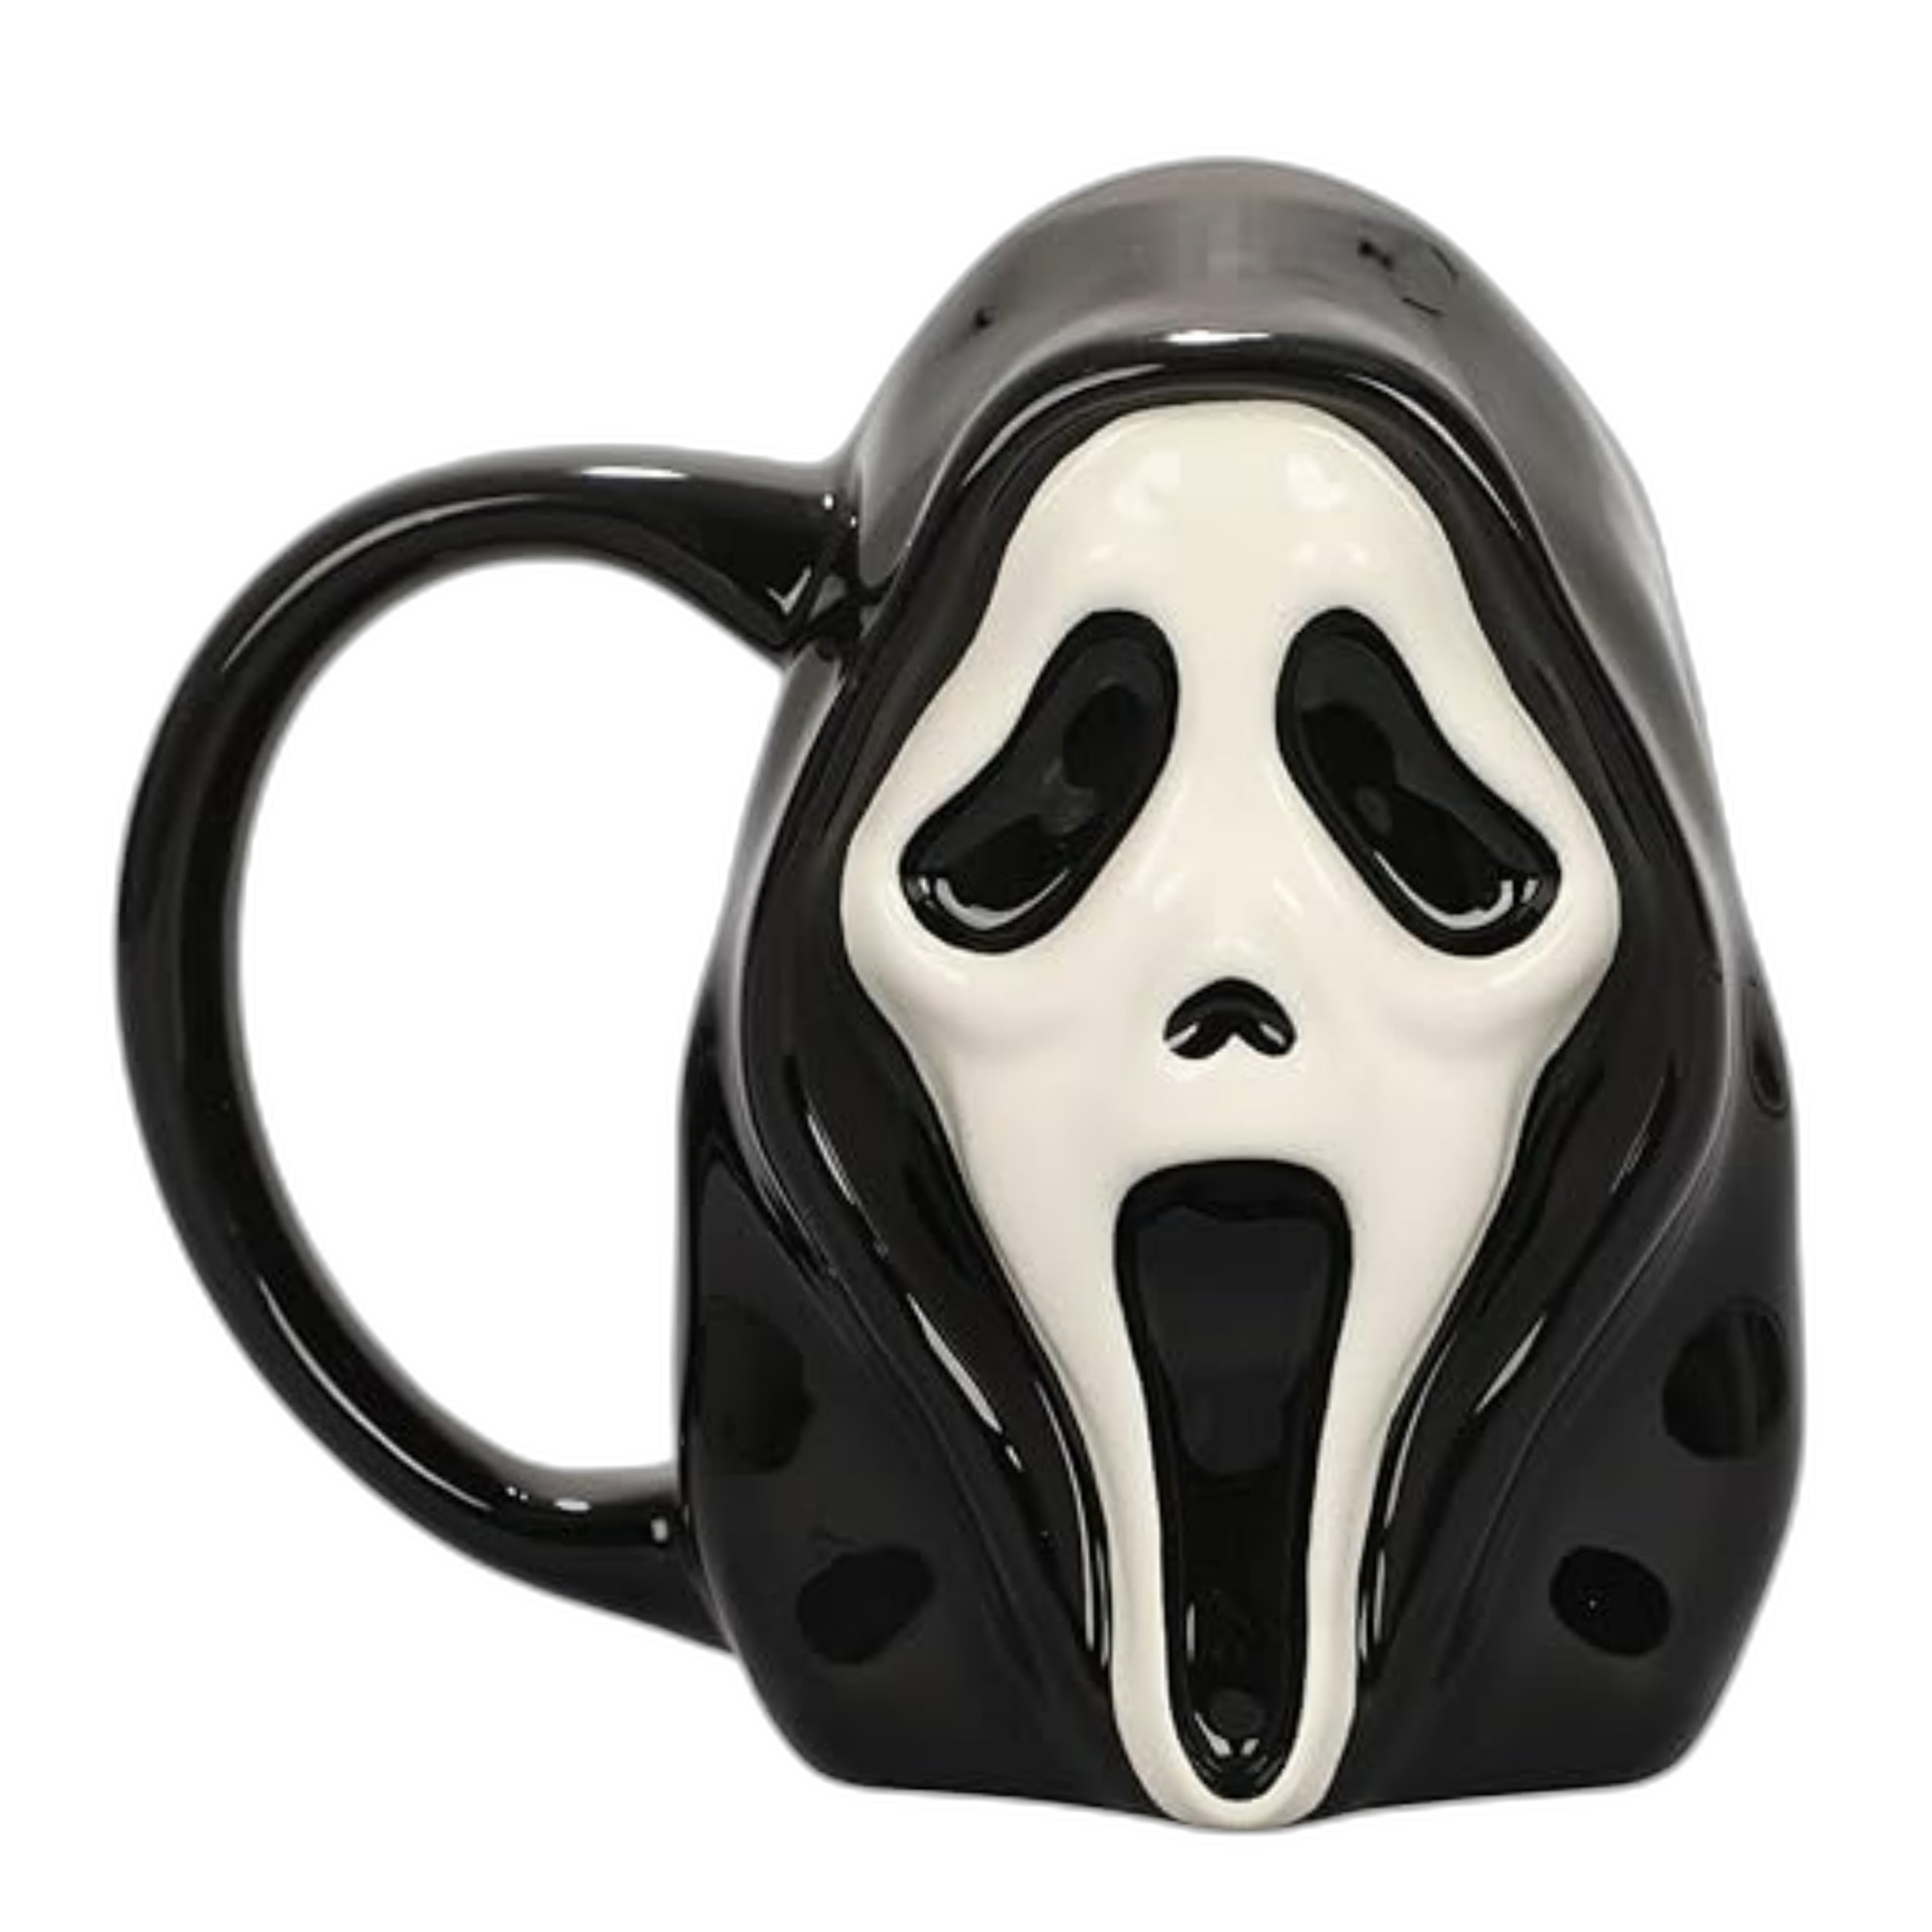 Black and white mug resembling the ghostface mask from the Scream franchise.